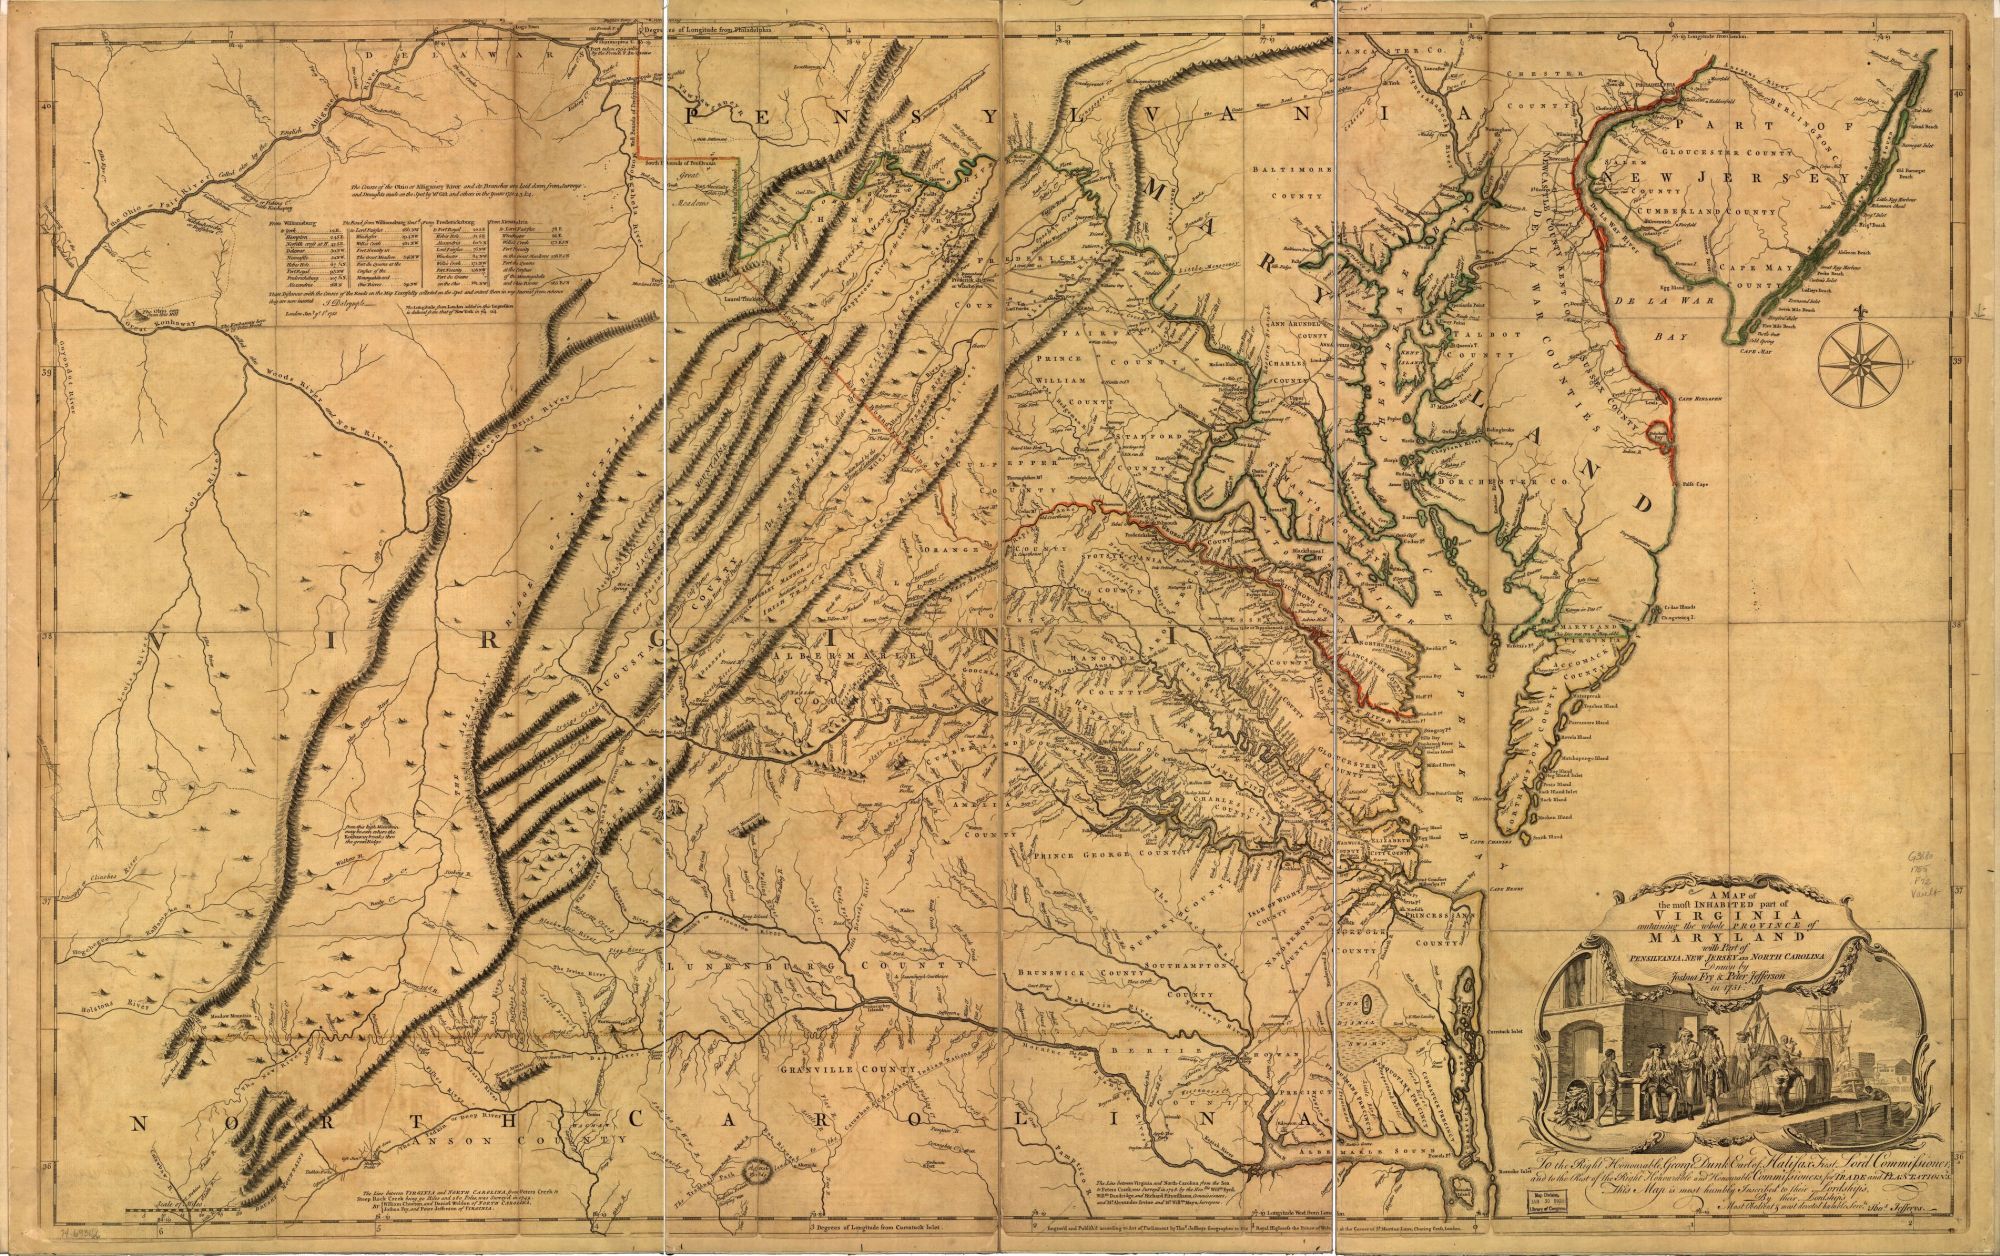 The researchers were stunned when the Duke handed them a map of Virginia from 1751. They instantly realized it was one of only three copies in existence of the most famous map of Virigina, surveyed and drawn by Roger Fry and Peter Jefferson, the father of Thomas Jefferson. A later edition of the map (above) is held by the Library of Congress.